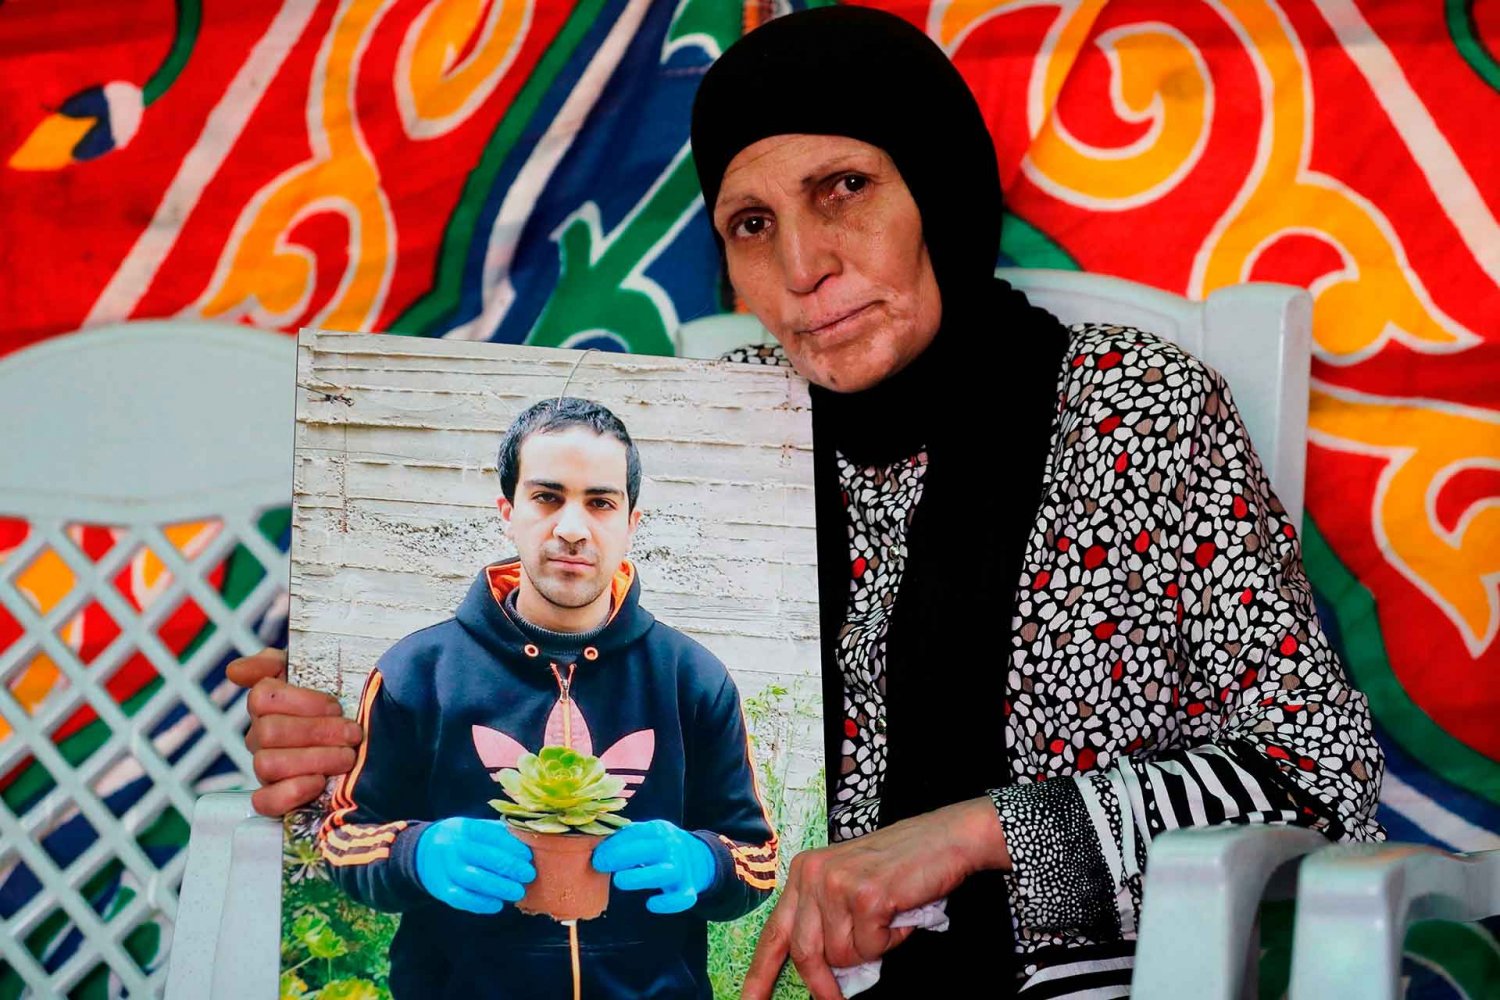 Rana Hallaq mourns her slain autistic son, Iyad on June 1, 2020; he was shot by Israeli police the previous day in the Old City of Jerusalem